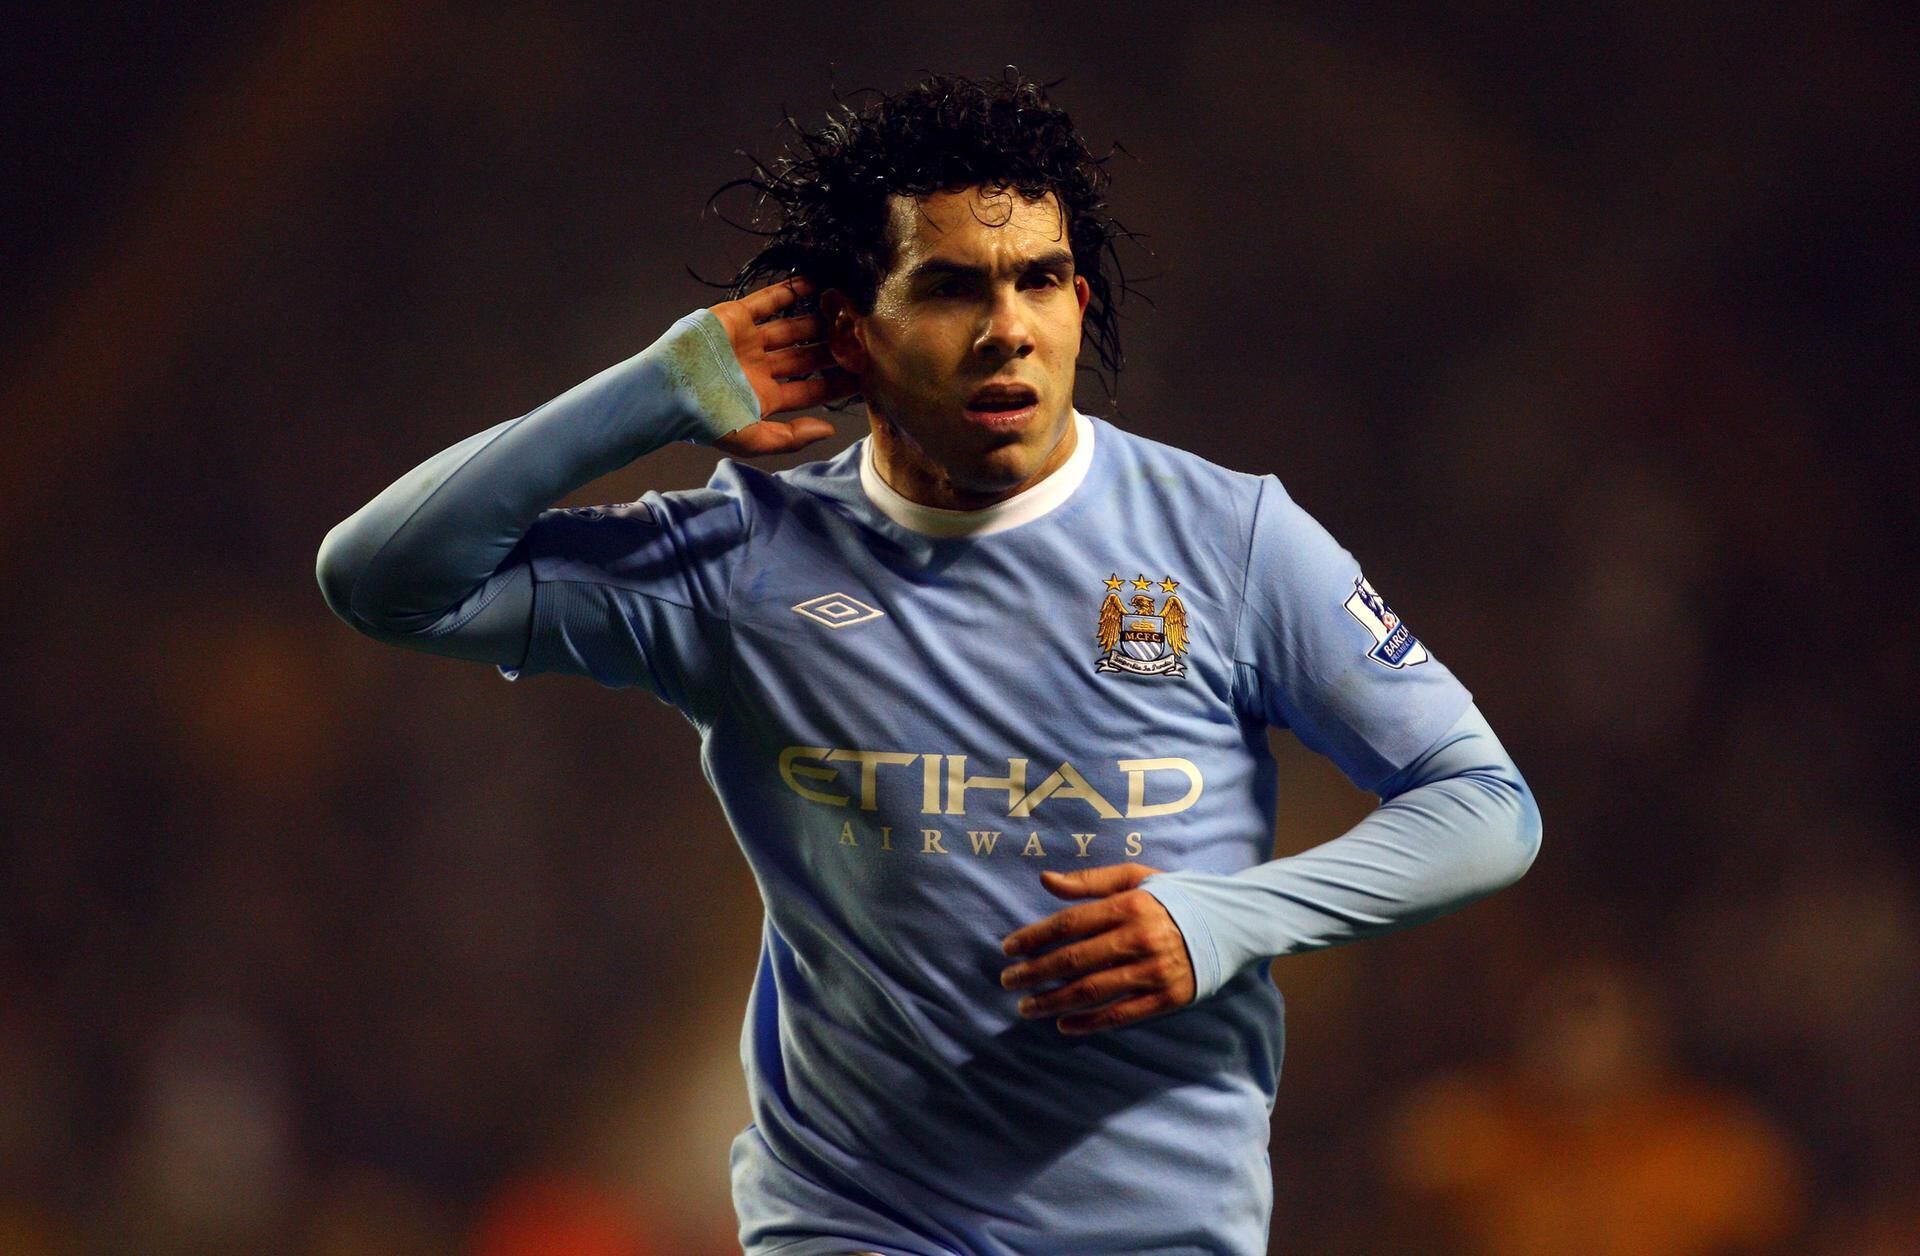 Seven worst ever football kits after Man City's controversial